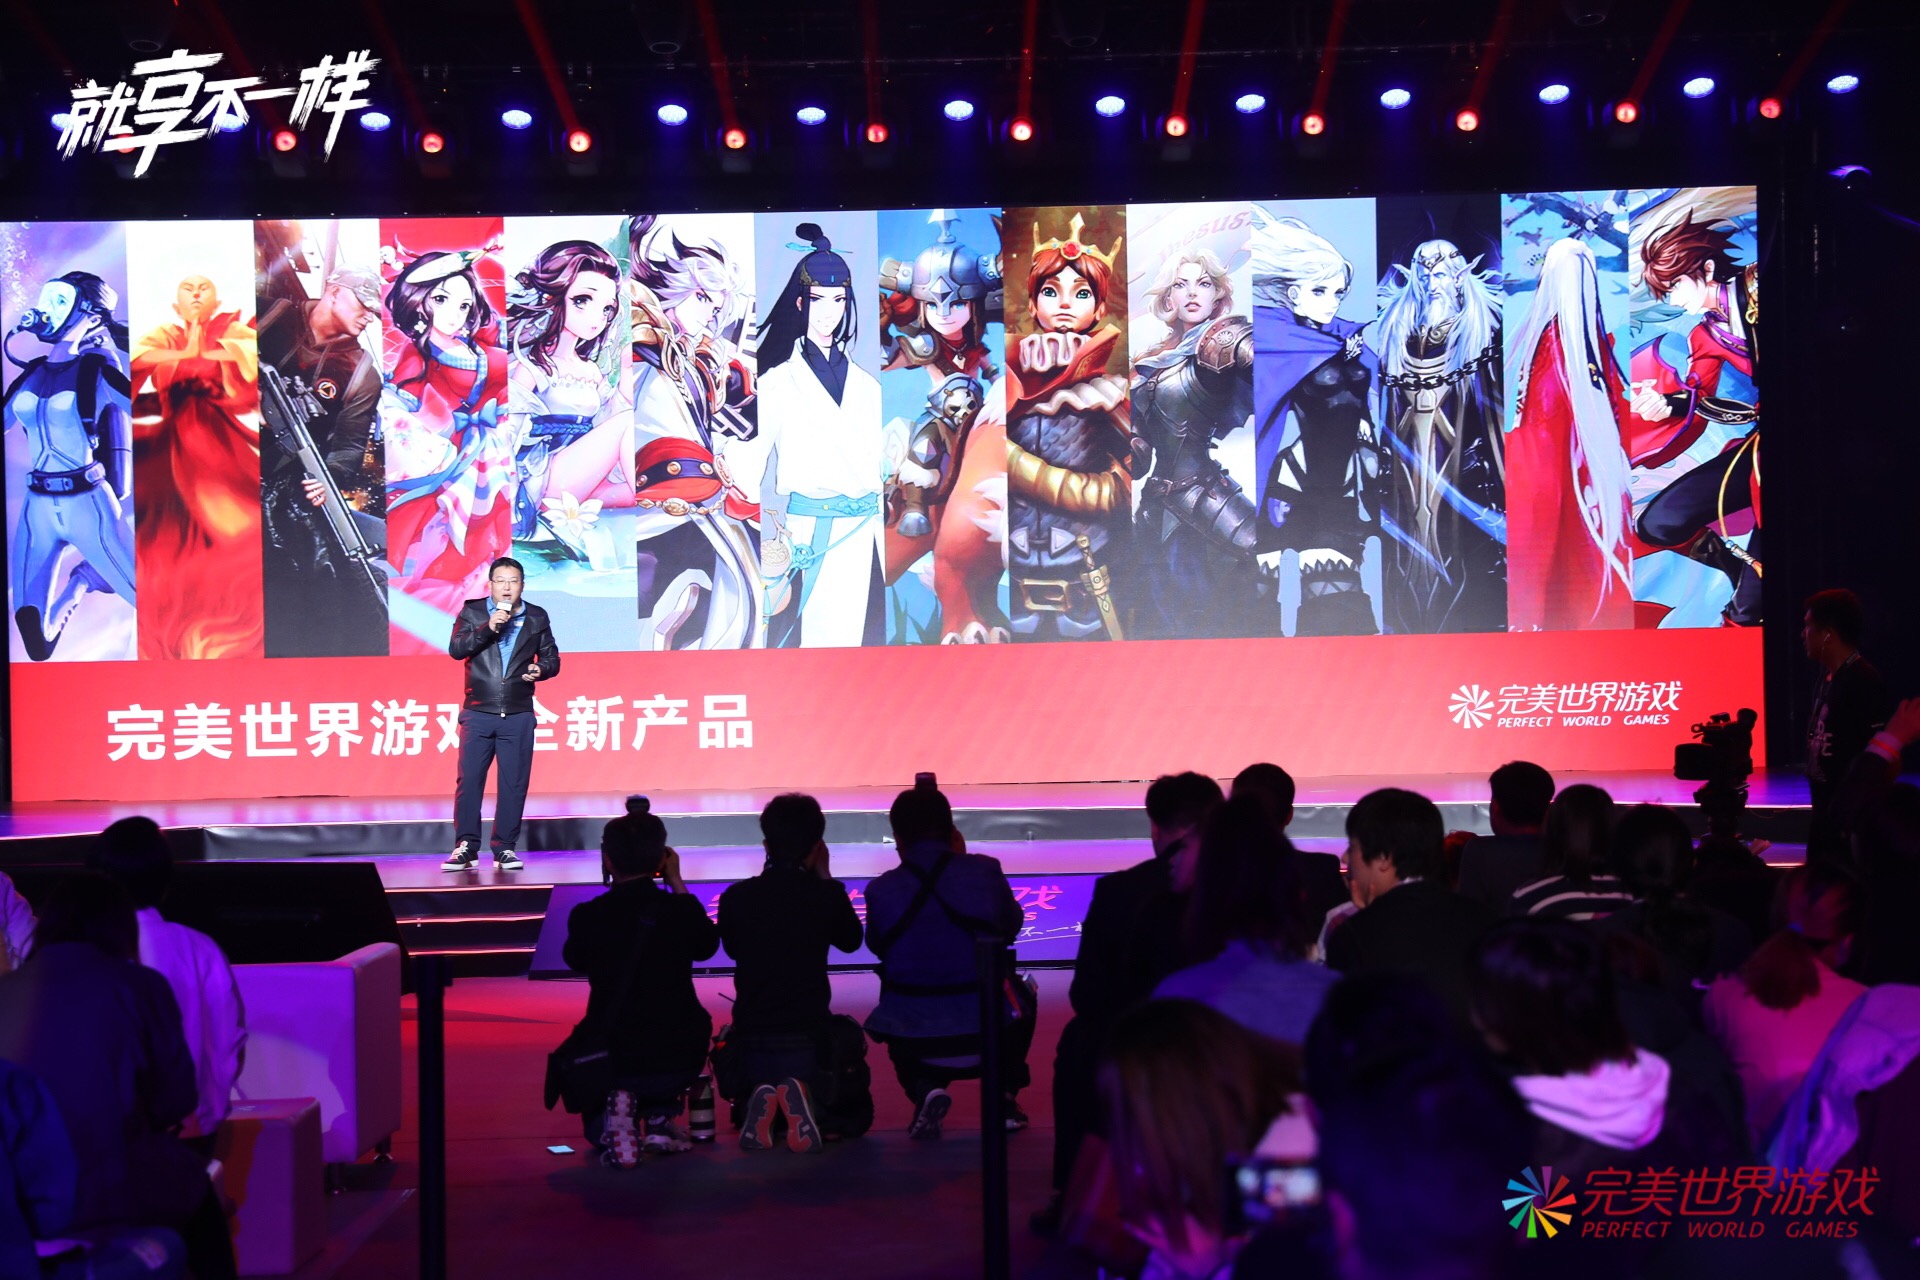 Lu Xiaoyin, COO of Perfect World Games, introduces the company's newly-launched games during a press conference in Beijing on March 27. [Photo courtesy of Perfect World]